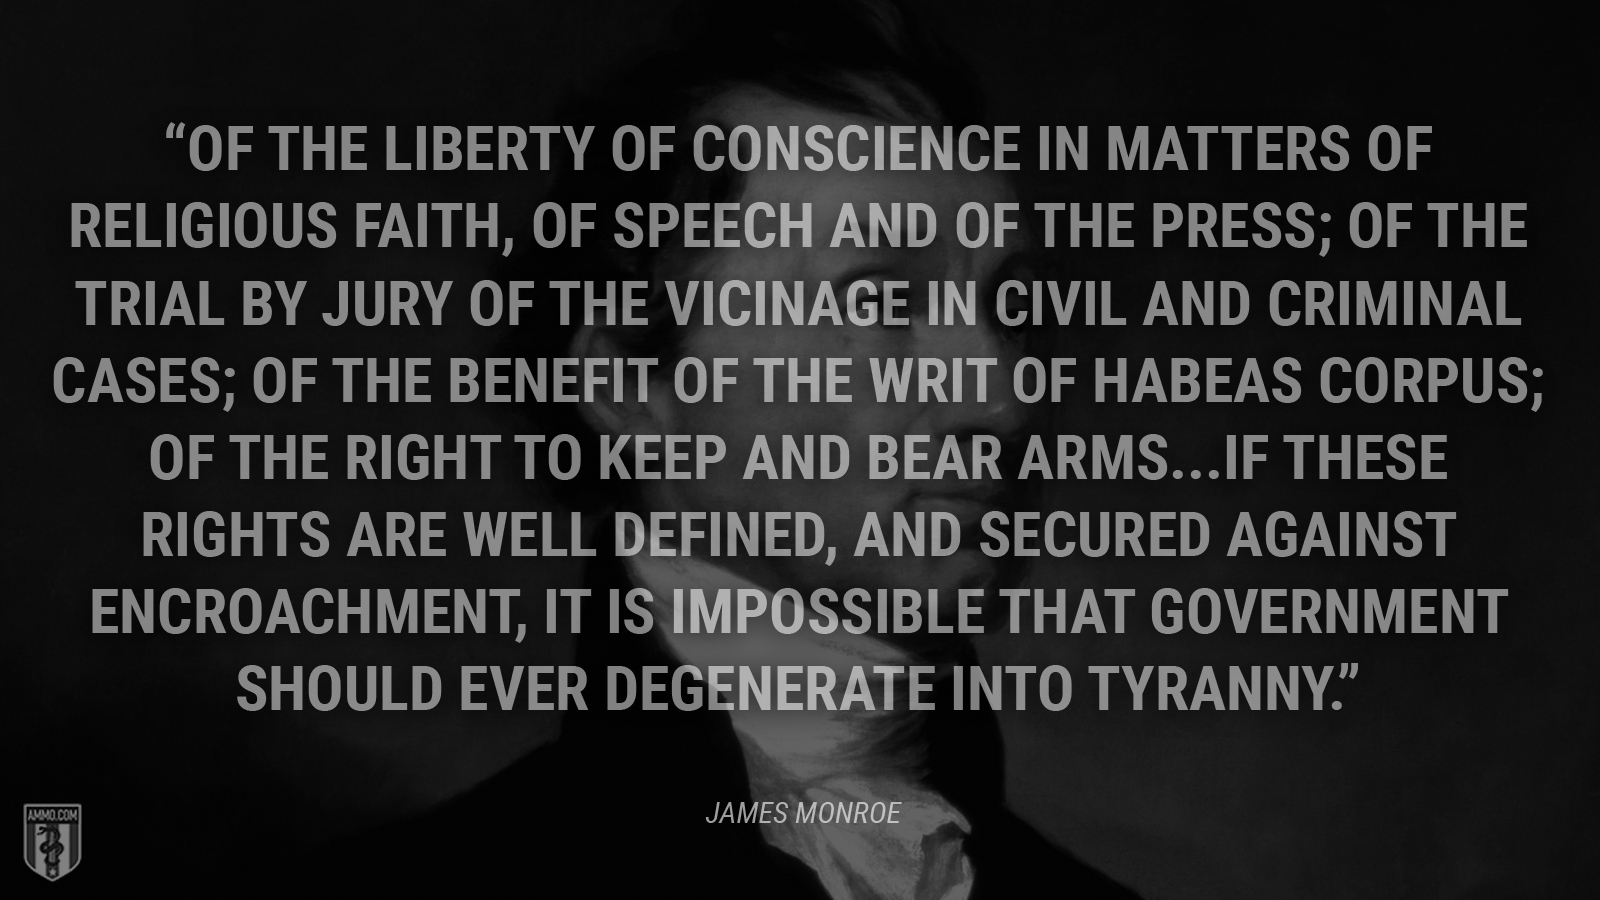 “Of the liberty of conscience in matters of religious faith, of speech and of the press; of the trial by jury of the vicinage in civil and criminal cases; of the benefit of the writ of habeas corpus; of the right to keep and bear arms...If these rights are well defined, and secured against encroachment, it is impossible that government should ever degenerate into tyranny.” - James Monroe